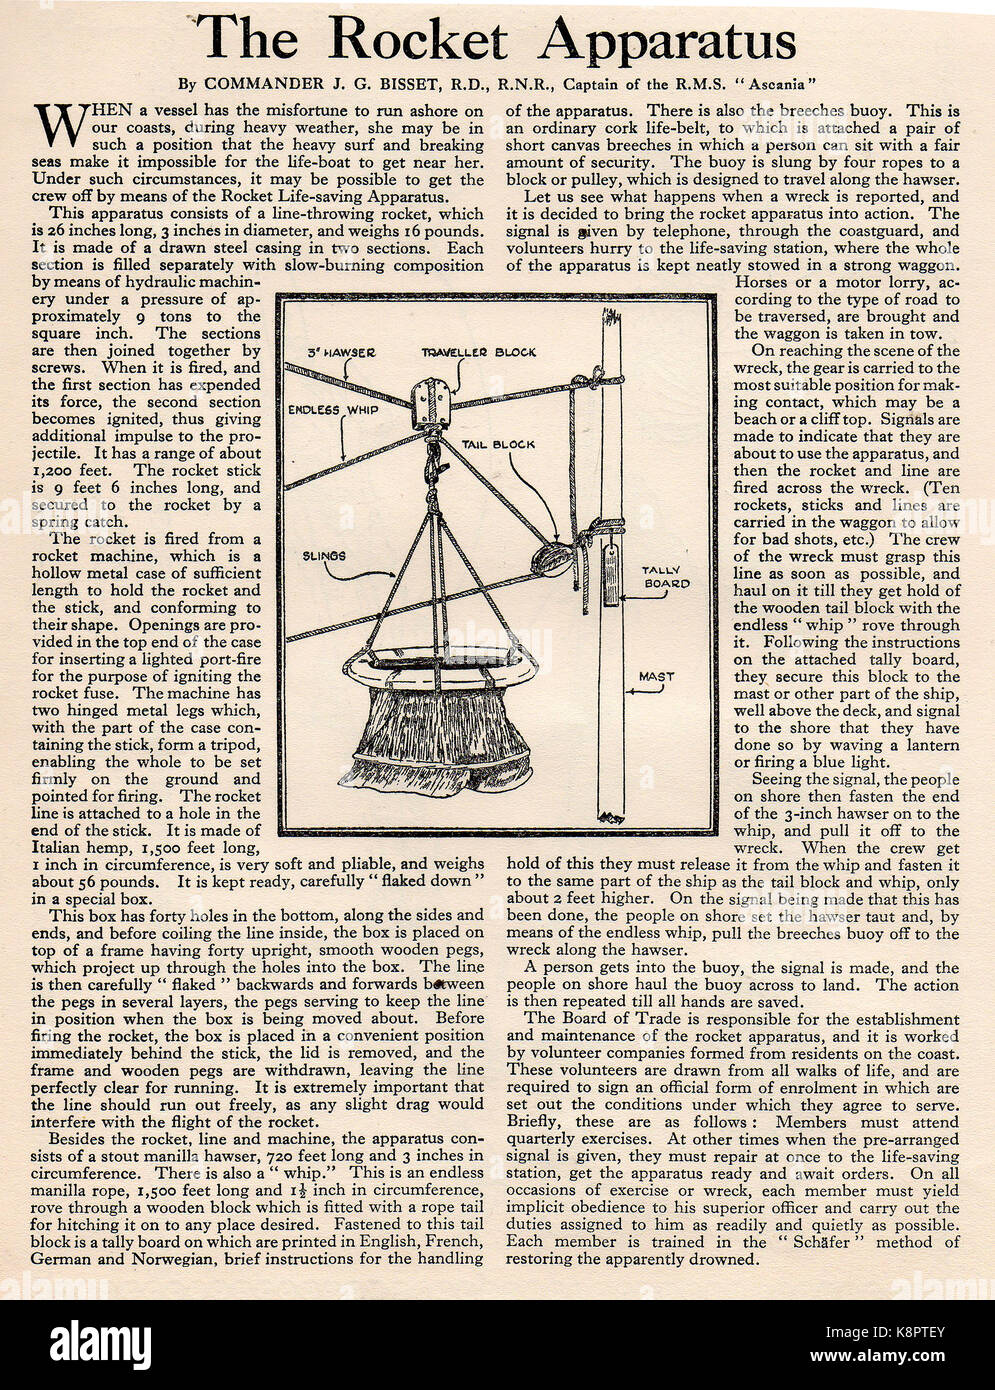 The rocket apparatus and chair used for rescuing mariners from shipwrecks - (From the Boys Own Annual 1932-33) Stock Photo